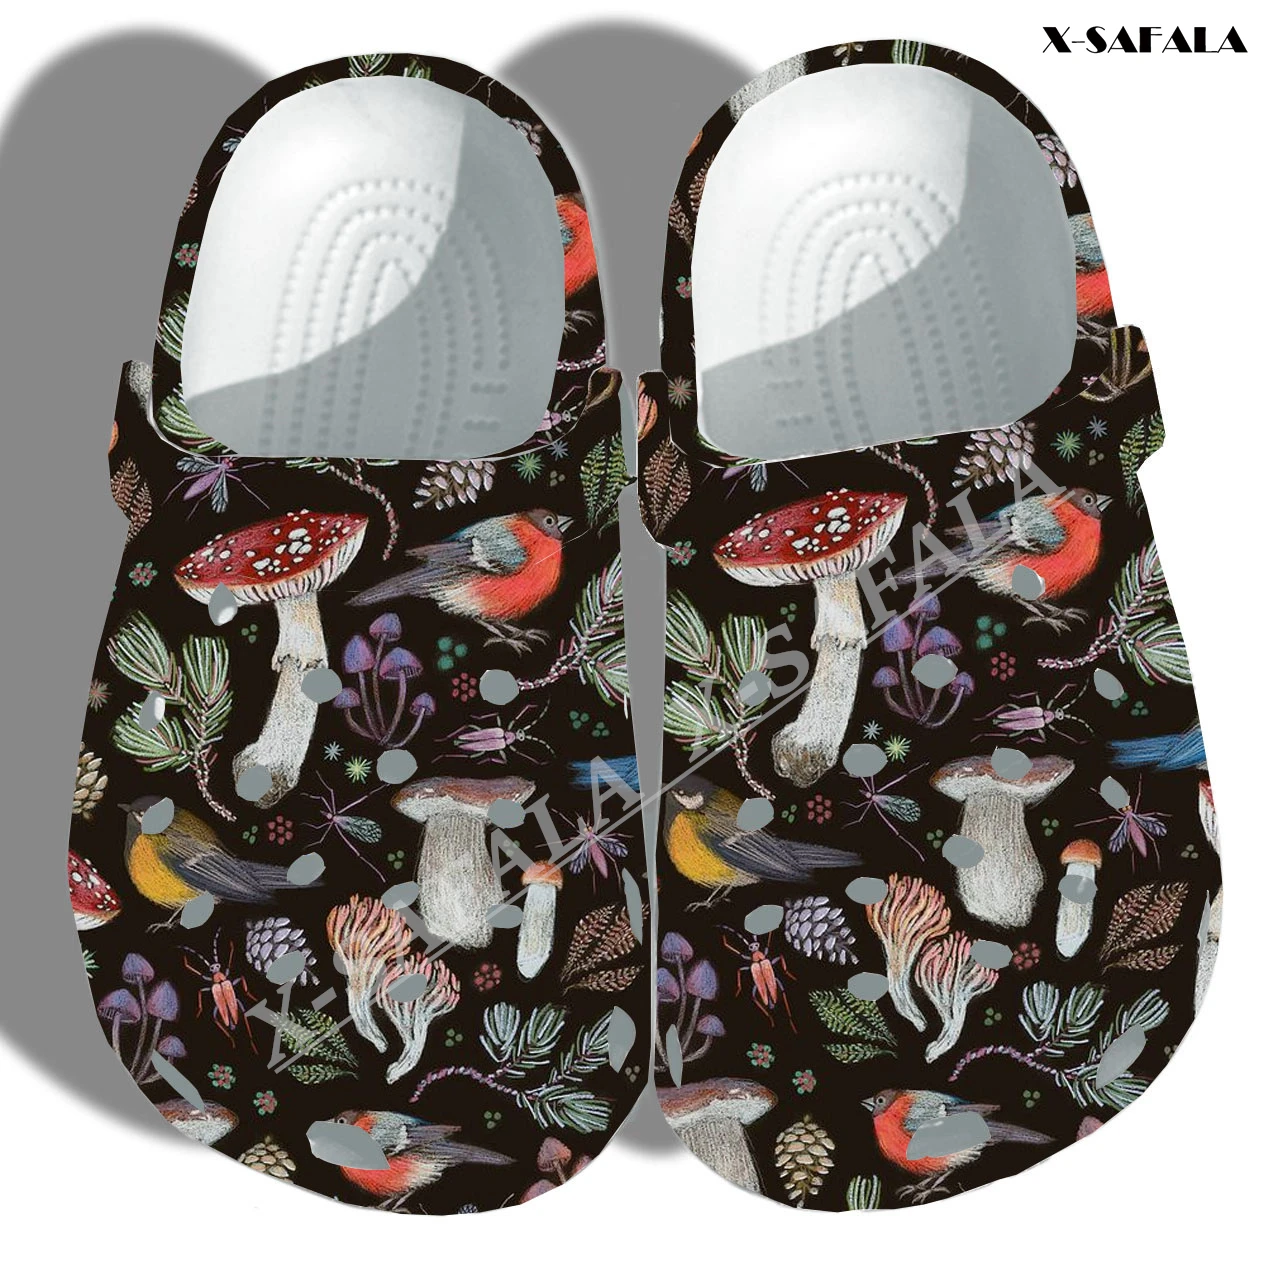 

Trippy Psychedelic Mushroom Fungus 3D Print Men Female Classic Beach Clog Slipper Shoes Medical EVA Customizable With Charms 10